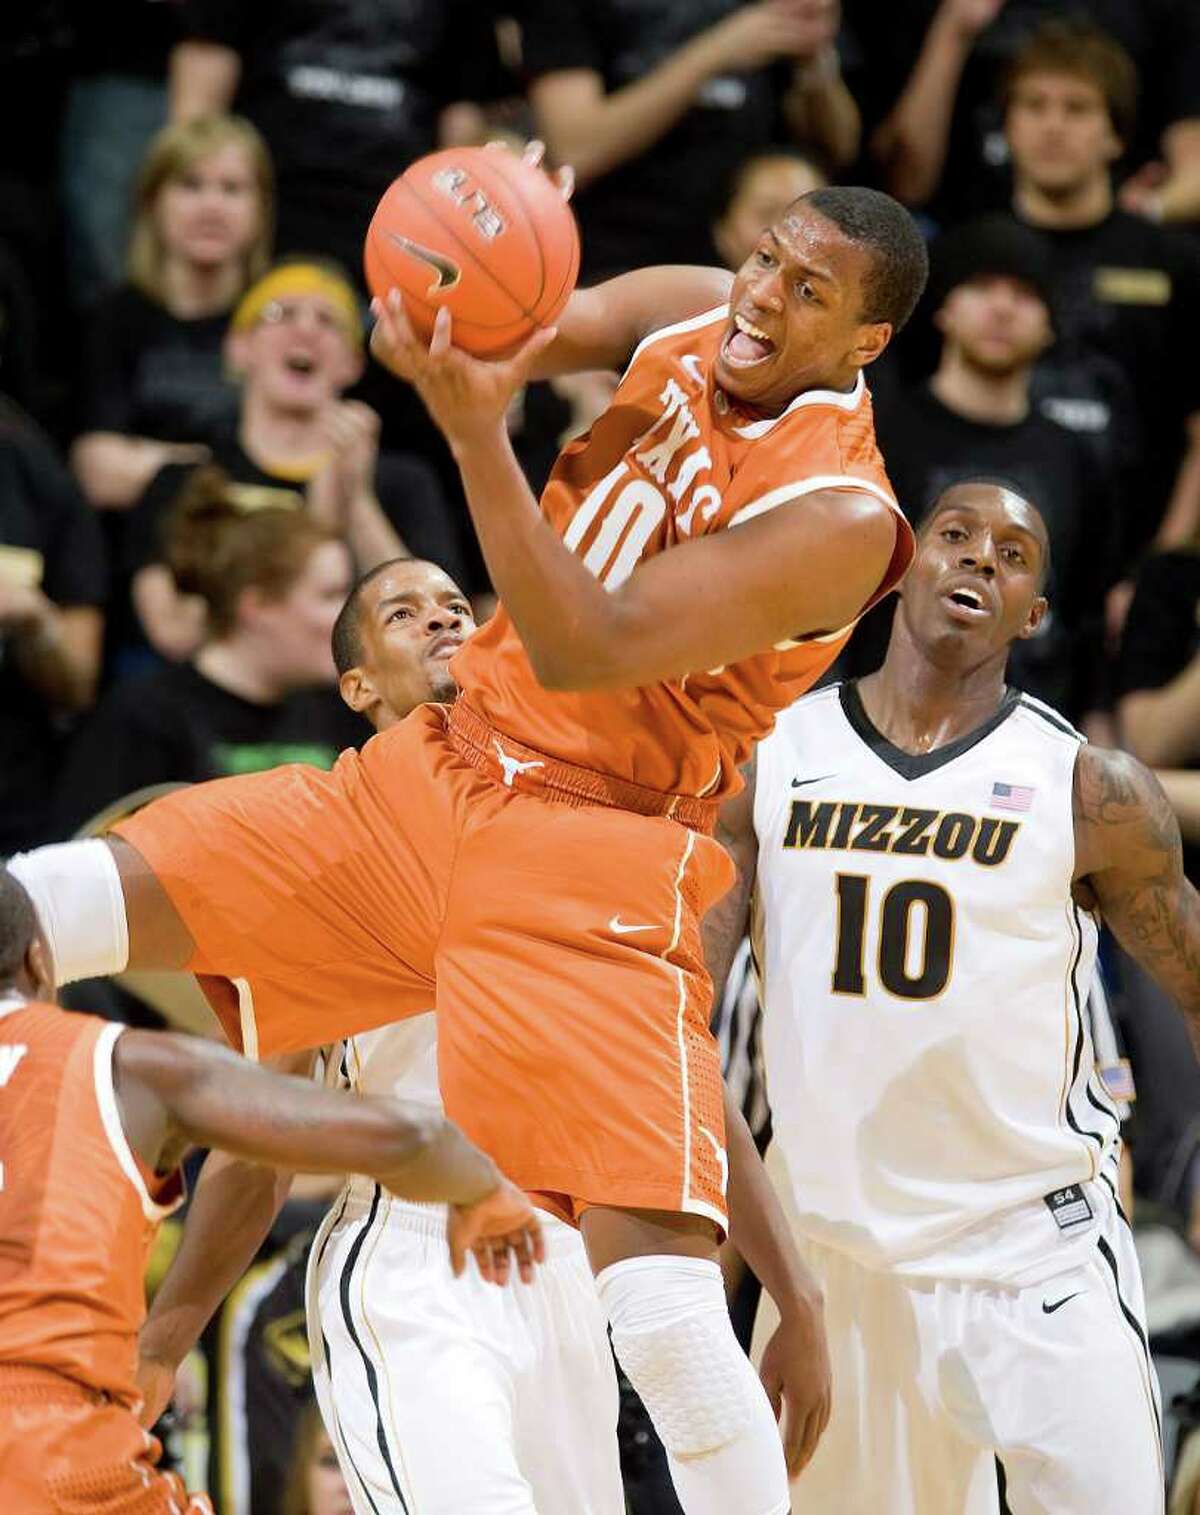 Texas' Jonathan Holmes, center, pulls down a rebound in front of Missouri's Ricardo Ratliffe, right, and Kim English, left, during the first half of an NCAA college basketball game Saturday, Jan. 14, 2012, in Columbia, Mo.